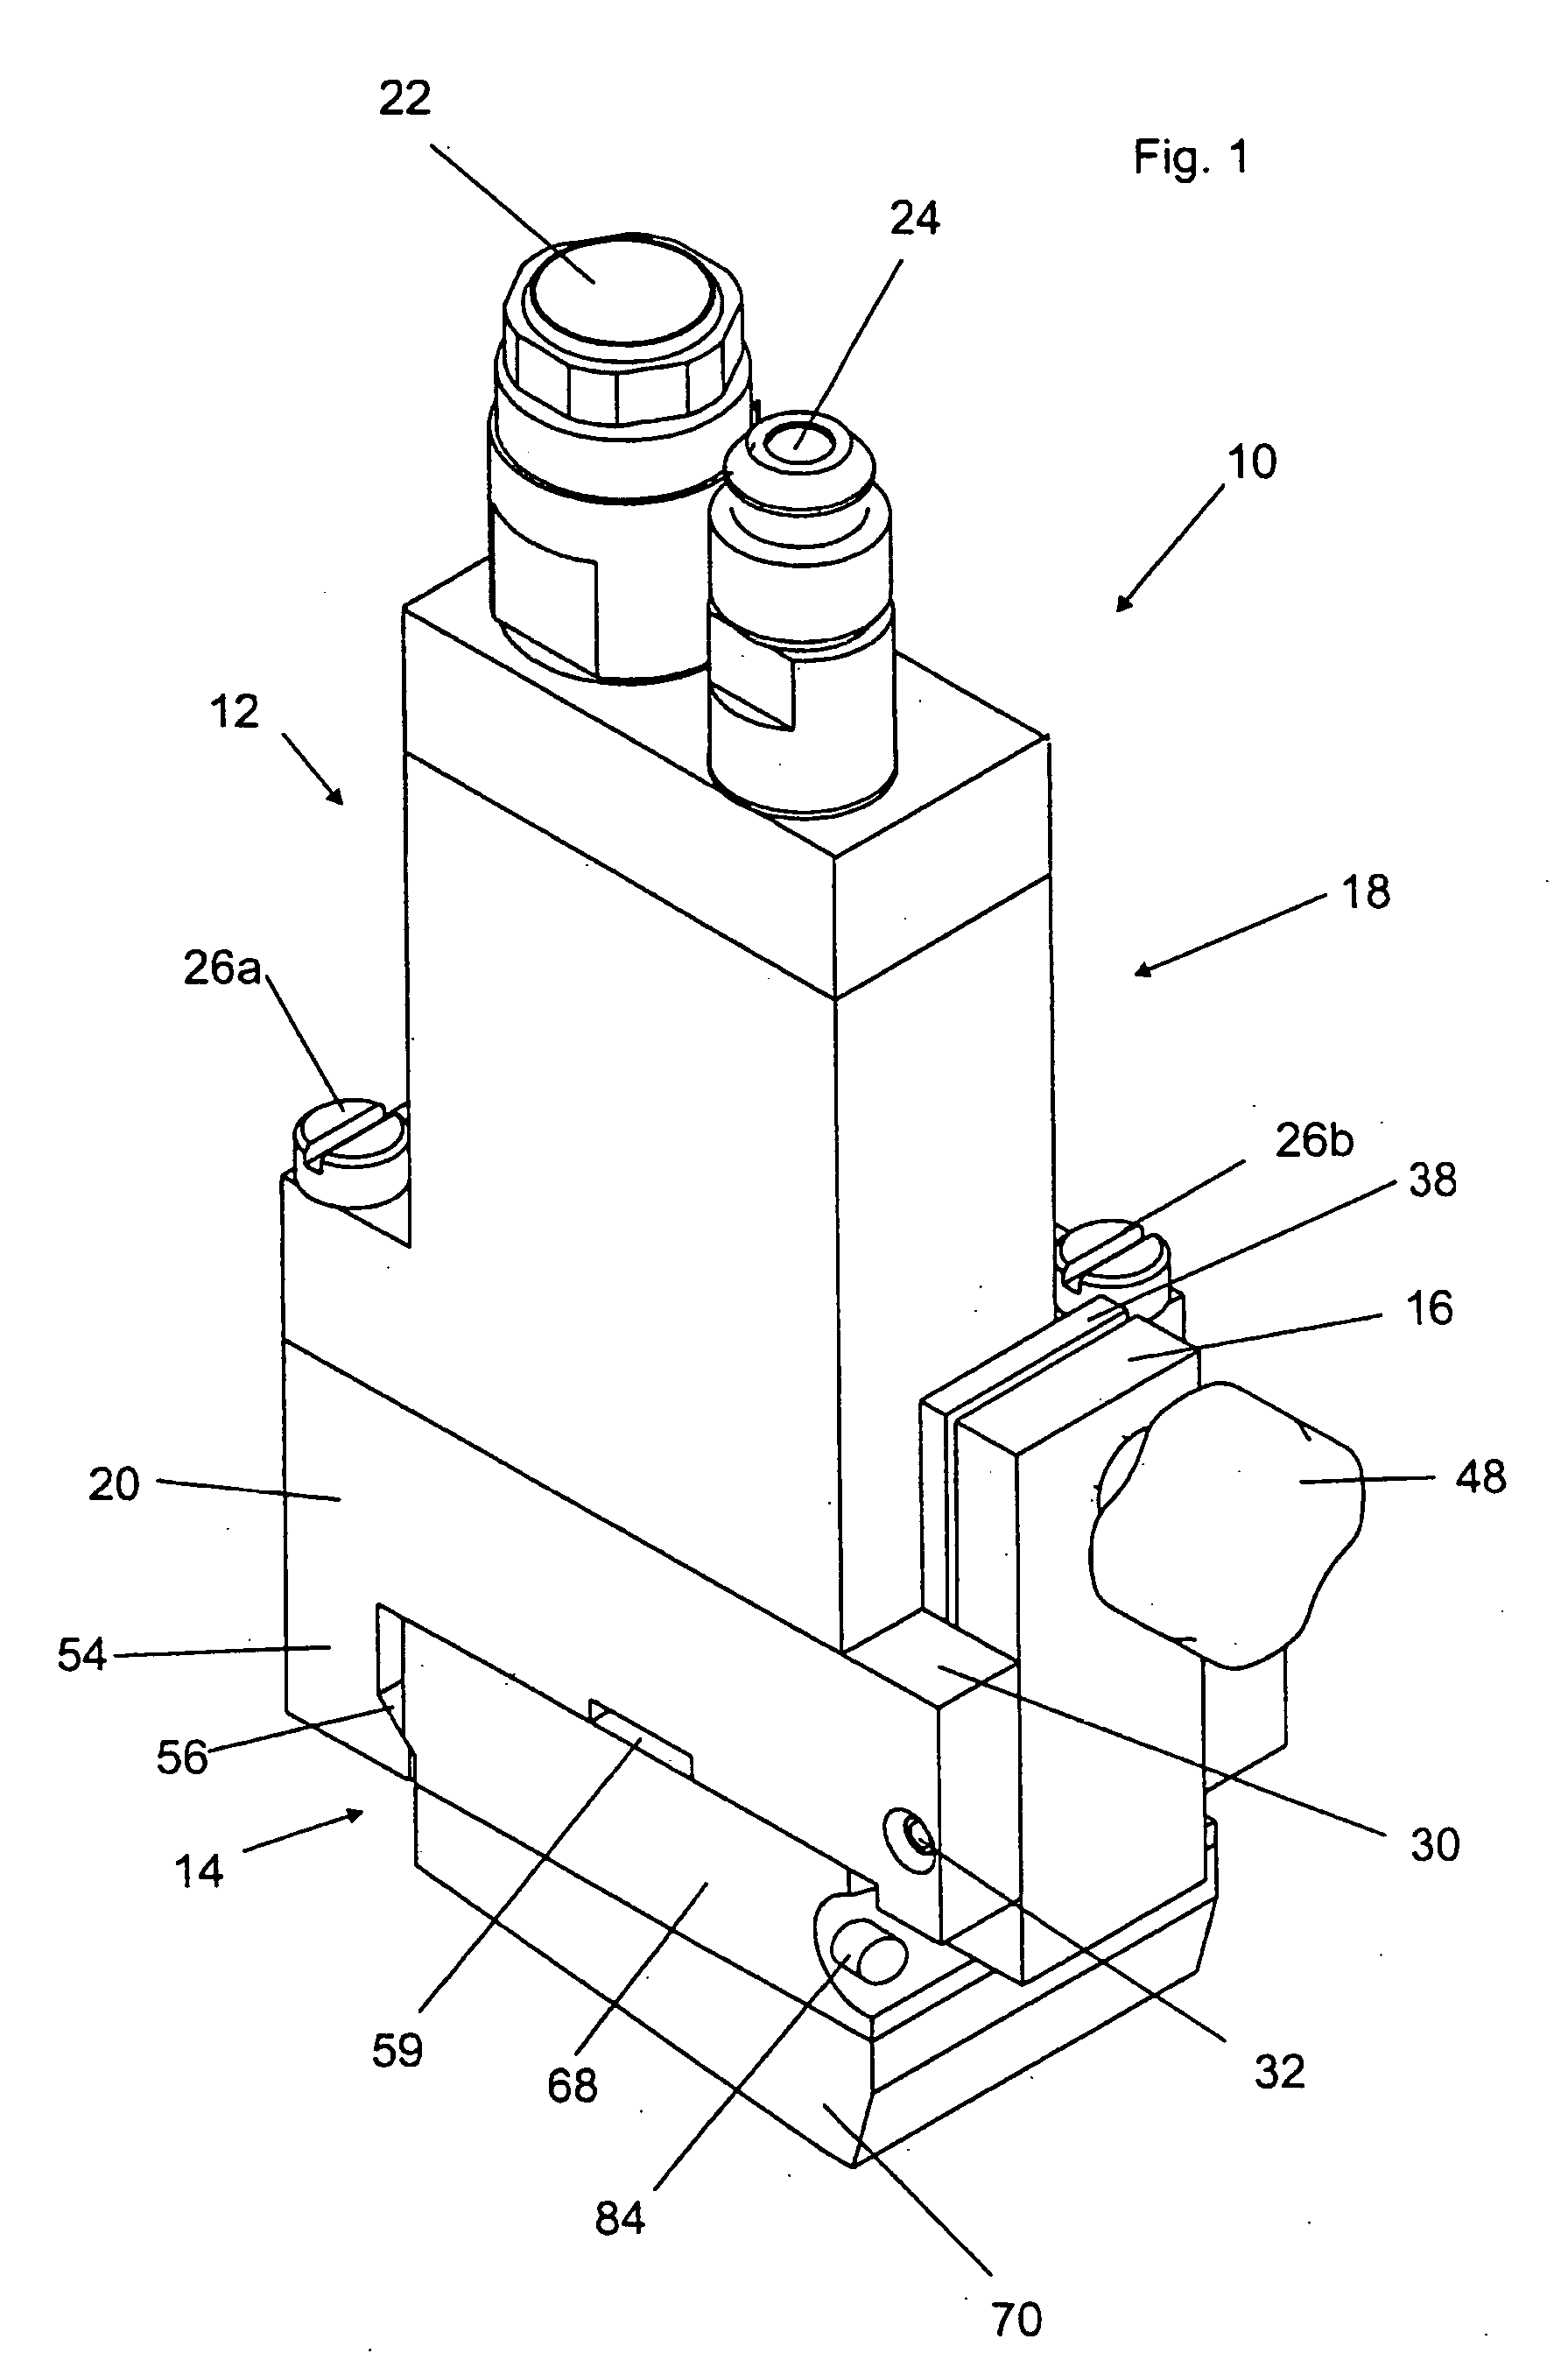 Applicator head, applicator nozzle arrangement, adaptor plate and mounting plate